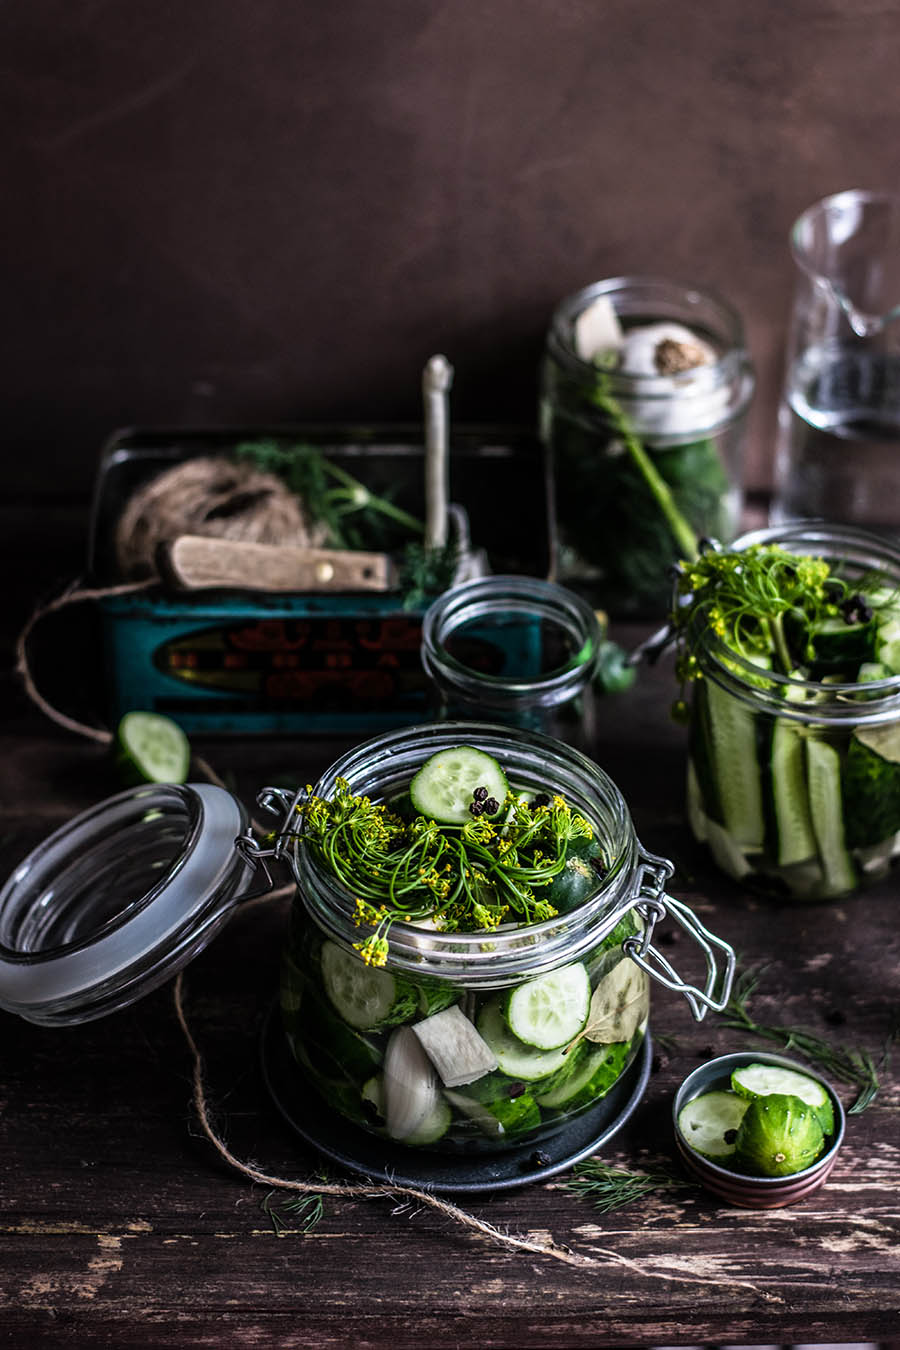 Why We Need to Eat More Fermented Foods